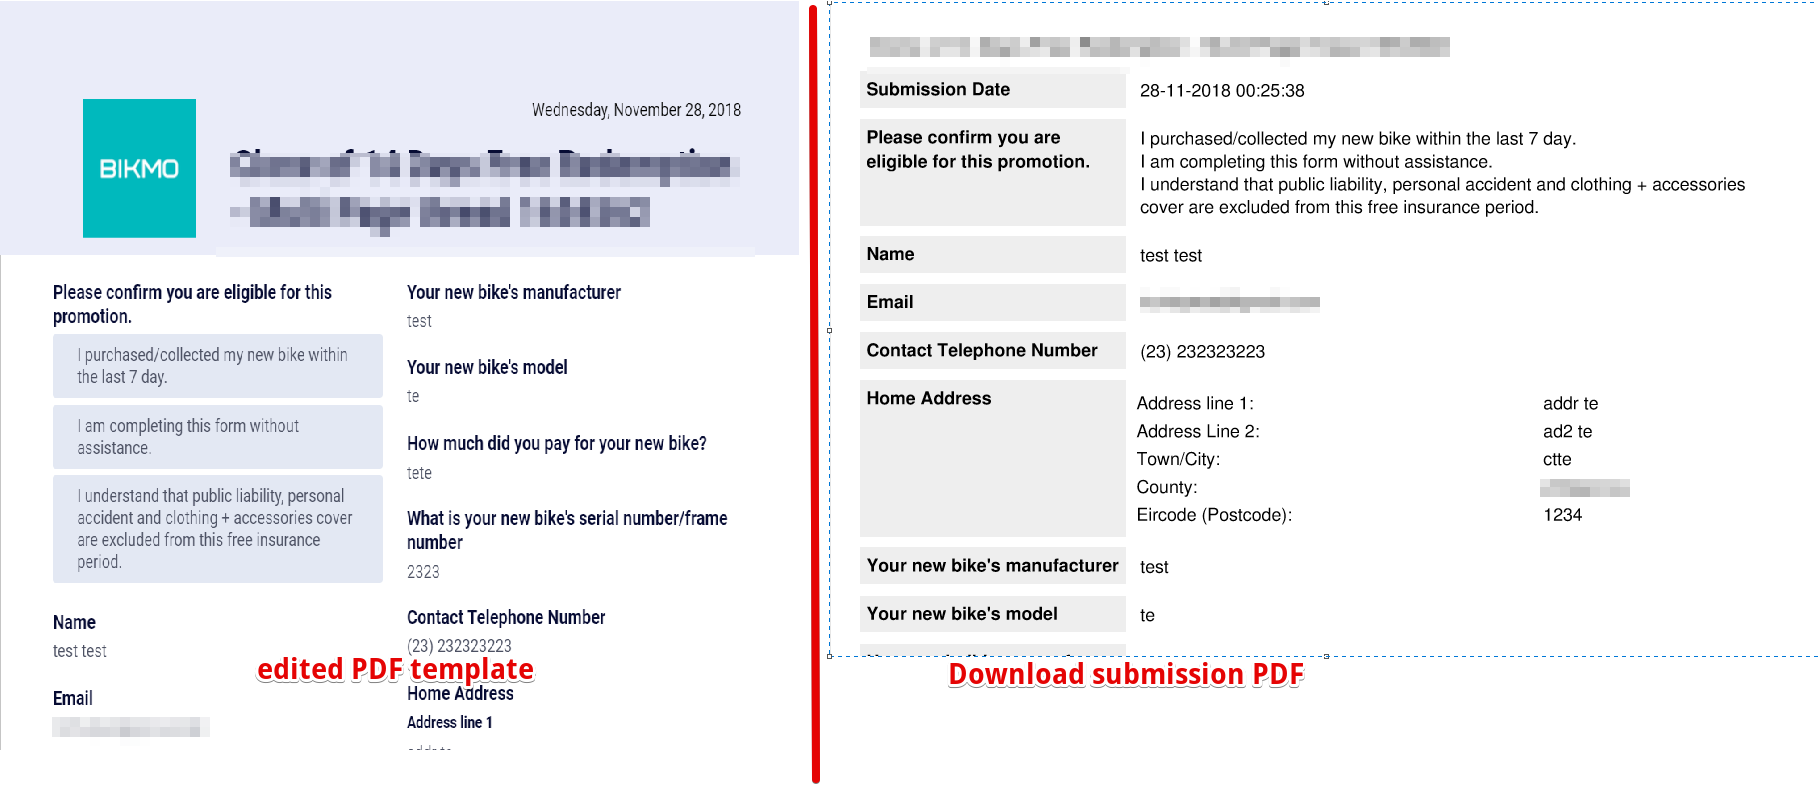 Customize PDF template: to be able to download all submissions at once using the edited PDF template Image 1 Screenshot 20